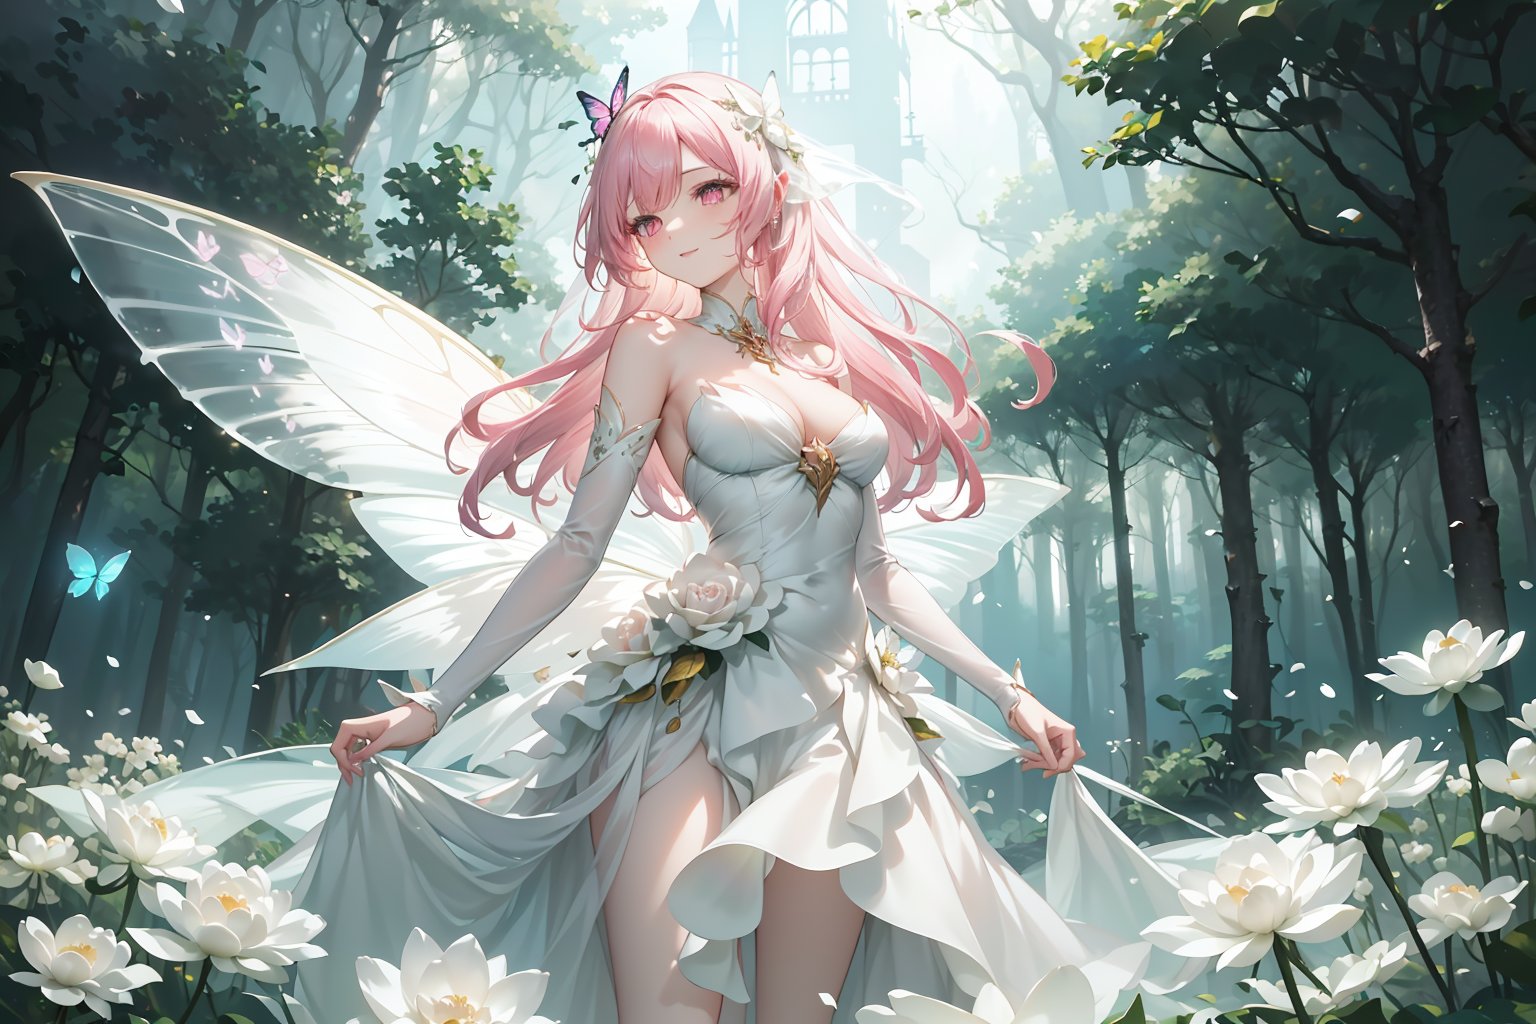 fairy, green nature, pink hair, pink eyes, white dress, long hair, flowing hair, gentle smile, graceful, elegant, beautiful, delicate features, rose-themed, floral accents, magical aura, fantasy setting, soft lighting, magical glow, whimsical, dreamlike, enchanting atmosphere, storybook-like, fairytale-inspired, surrounded by nature, magical creatures, enchanting forest, glowing flowers, butterfly accessories, delicate butterfly wings, gentle breeze, flowing dress, peaceful, serene, magical powers, glowing eyes, magical symbols, fairy tale castle, magical landscape, fantasy art, masterwork, high quality, ultra-detailed, ethereal beauty, otherworldly, fantasy lighting.",xuer Lotus leaf,DonM0m3g4,TinkerWaifu,Anigame ,glowwave,TDSVxxx,sks,firefliesfireflies,floral dress